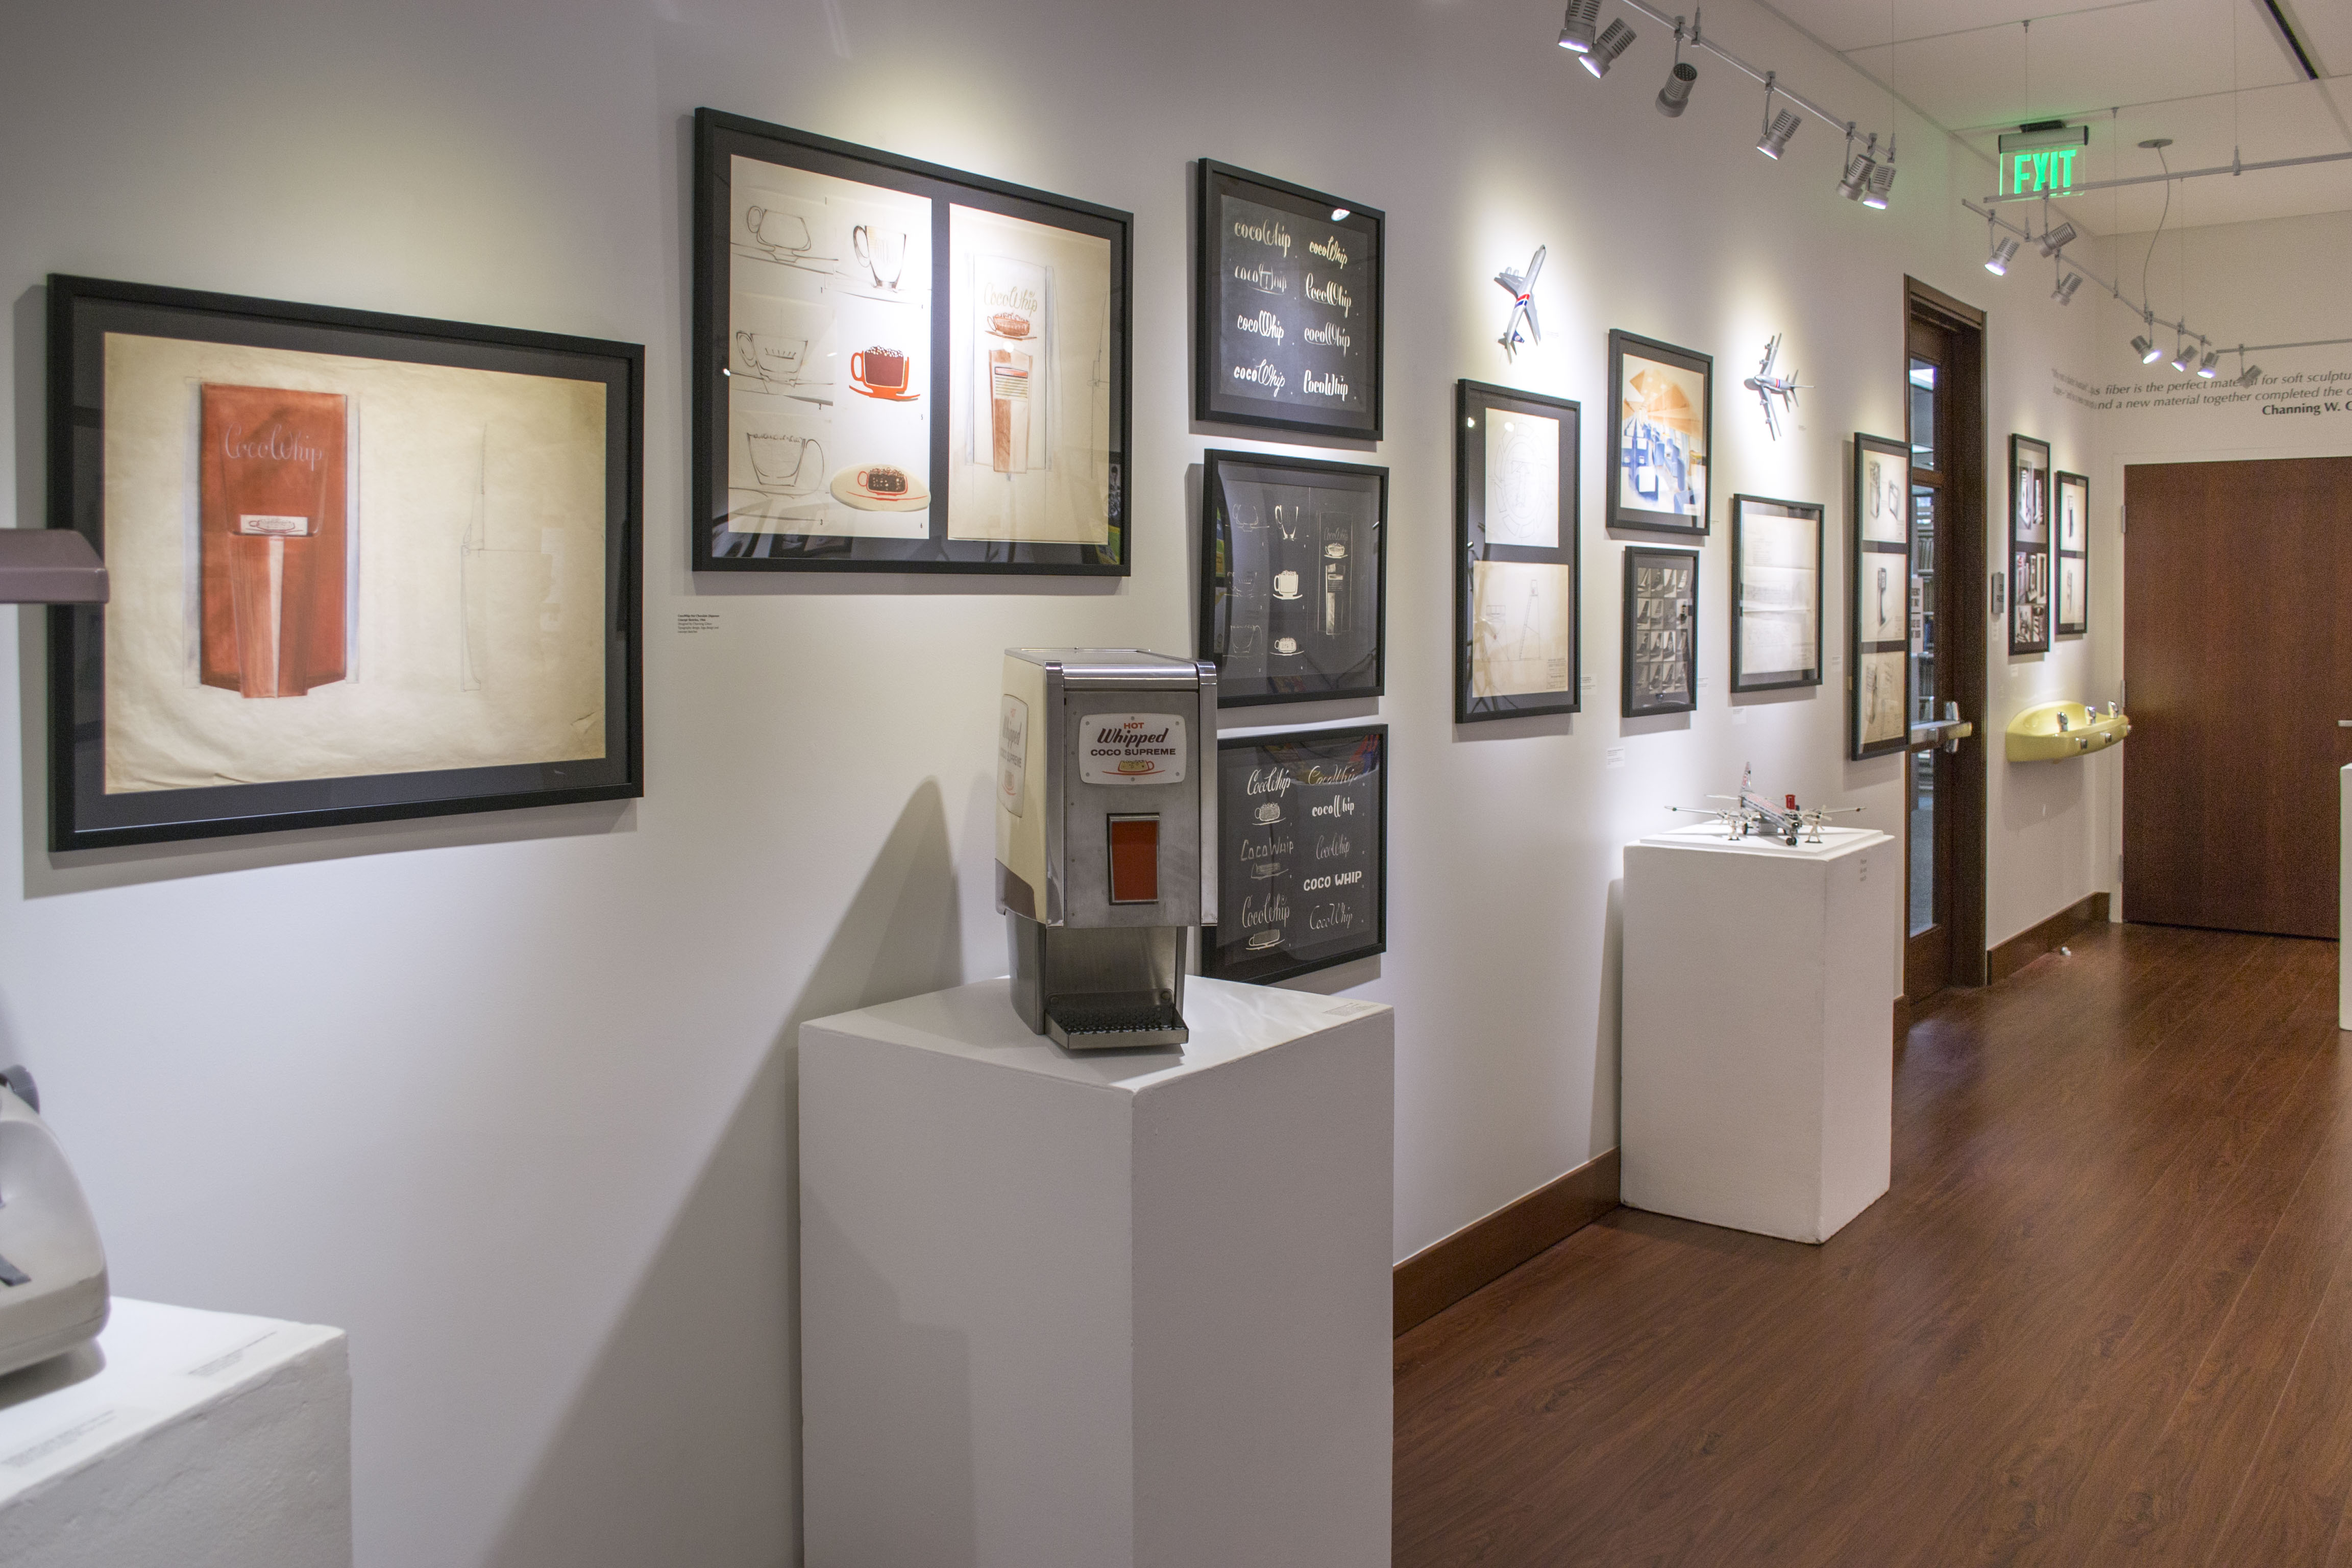 Installation View, Front of Gallery, The Gilson Collection: Midcentury Design at Cal Poly Pomona Exhibition, 2014.